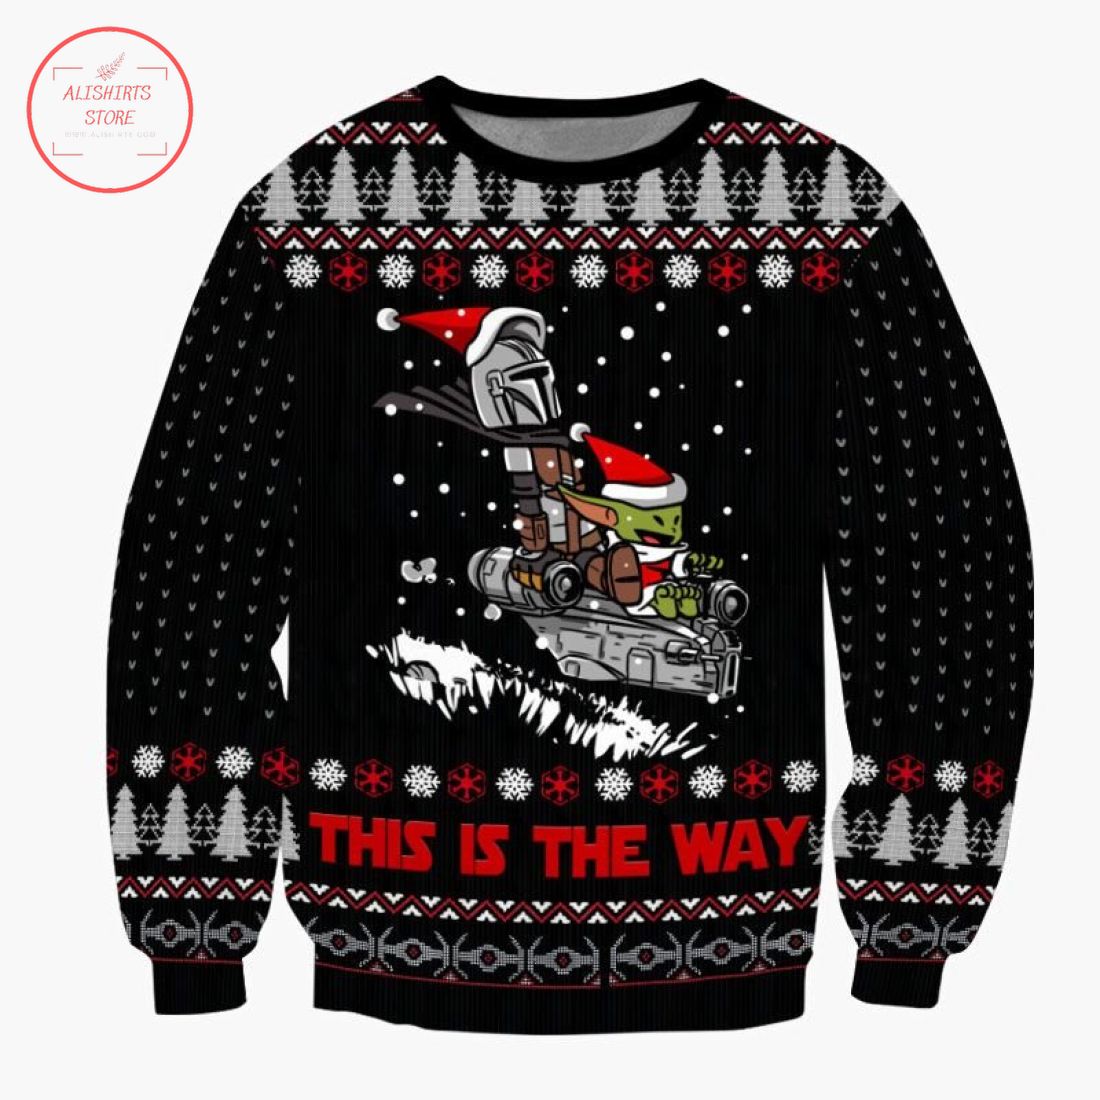 This is the way Yoda Star Wars Ugly Christmas Sweater